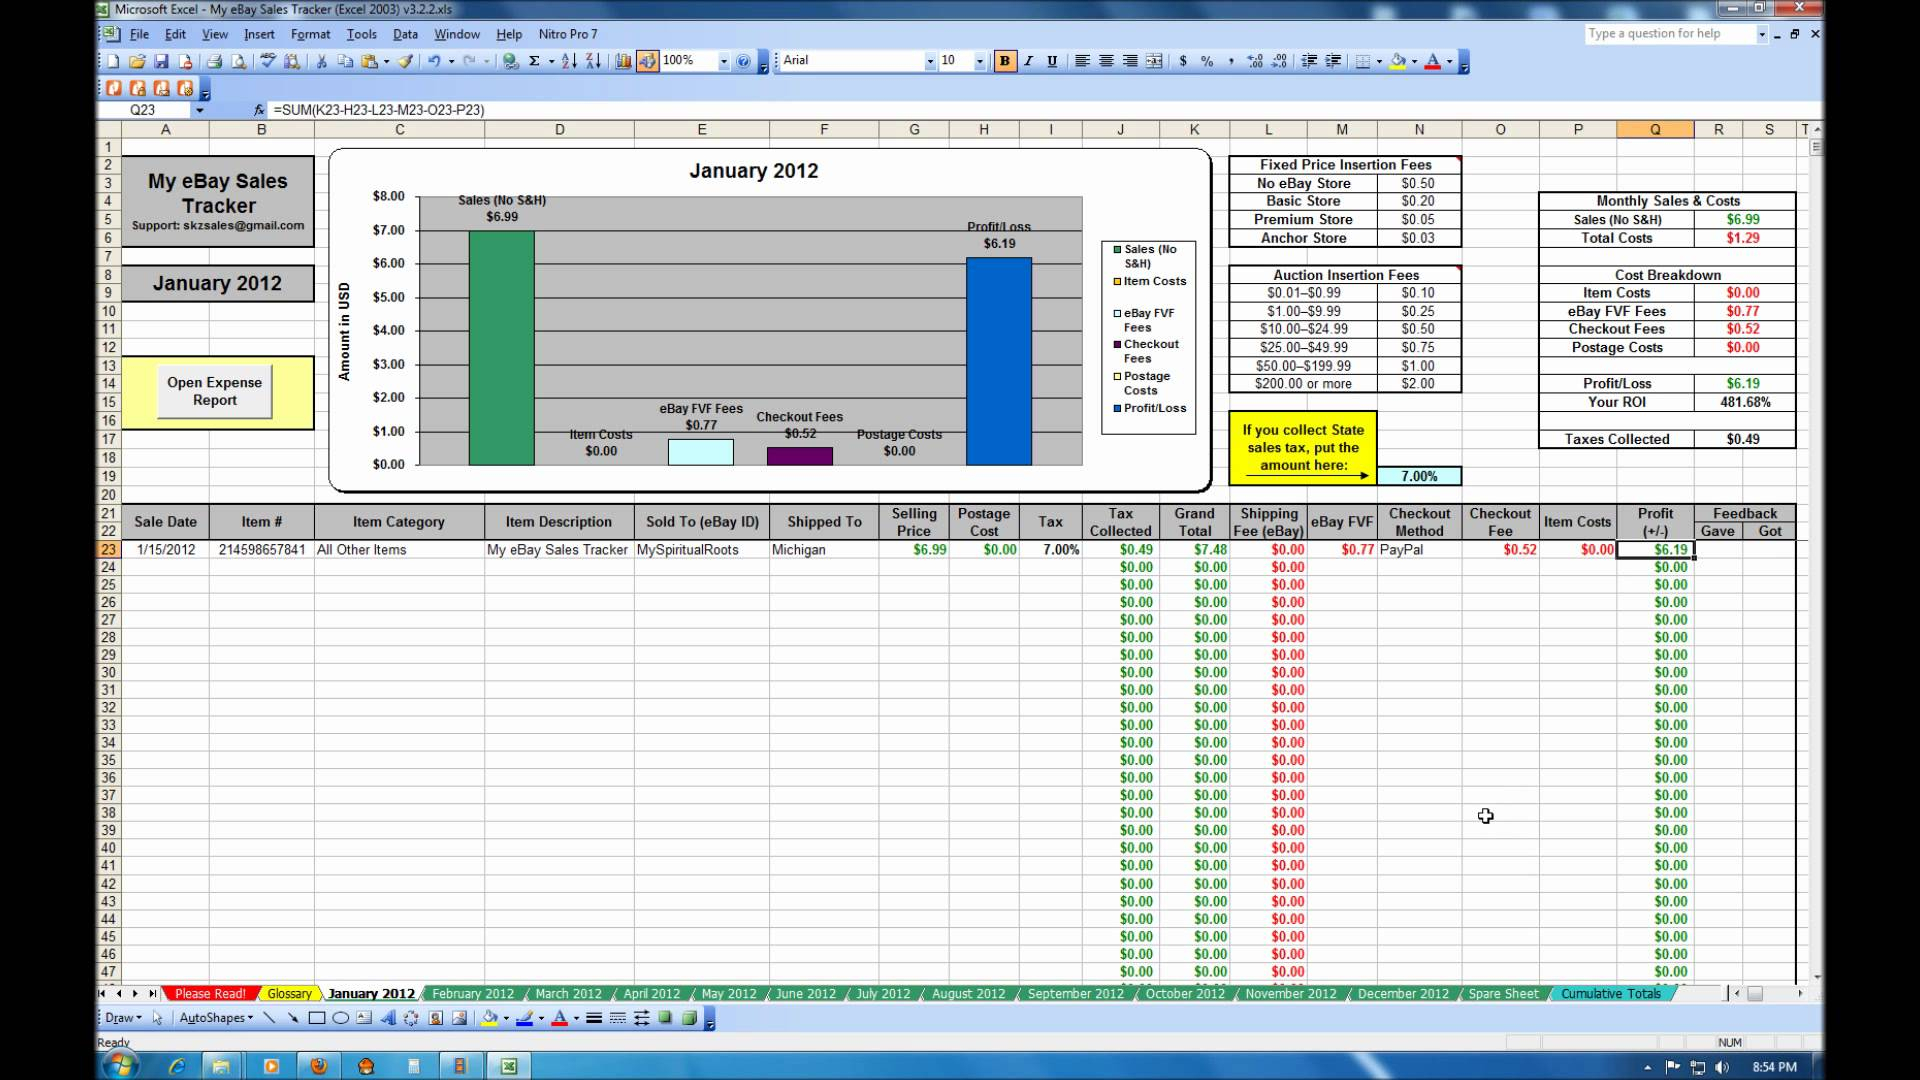 Sales Tracking Spreadsheet On Excel Spreadsheet Free Excel With Sales And Inventory Management Spreadsheet Template Free